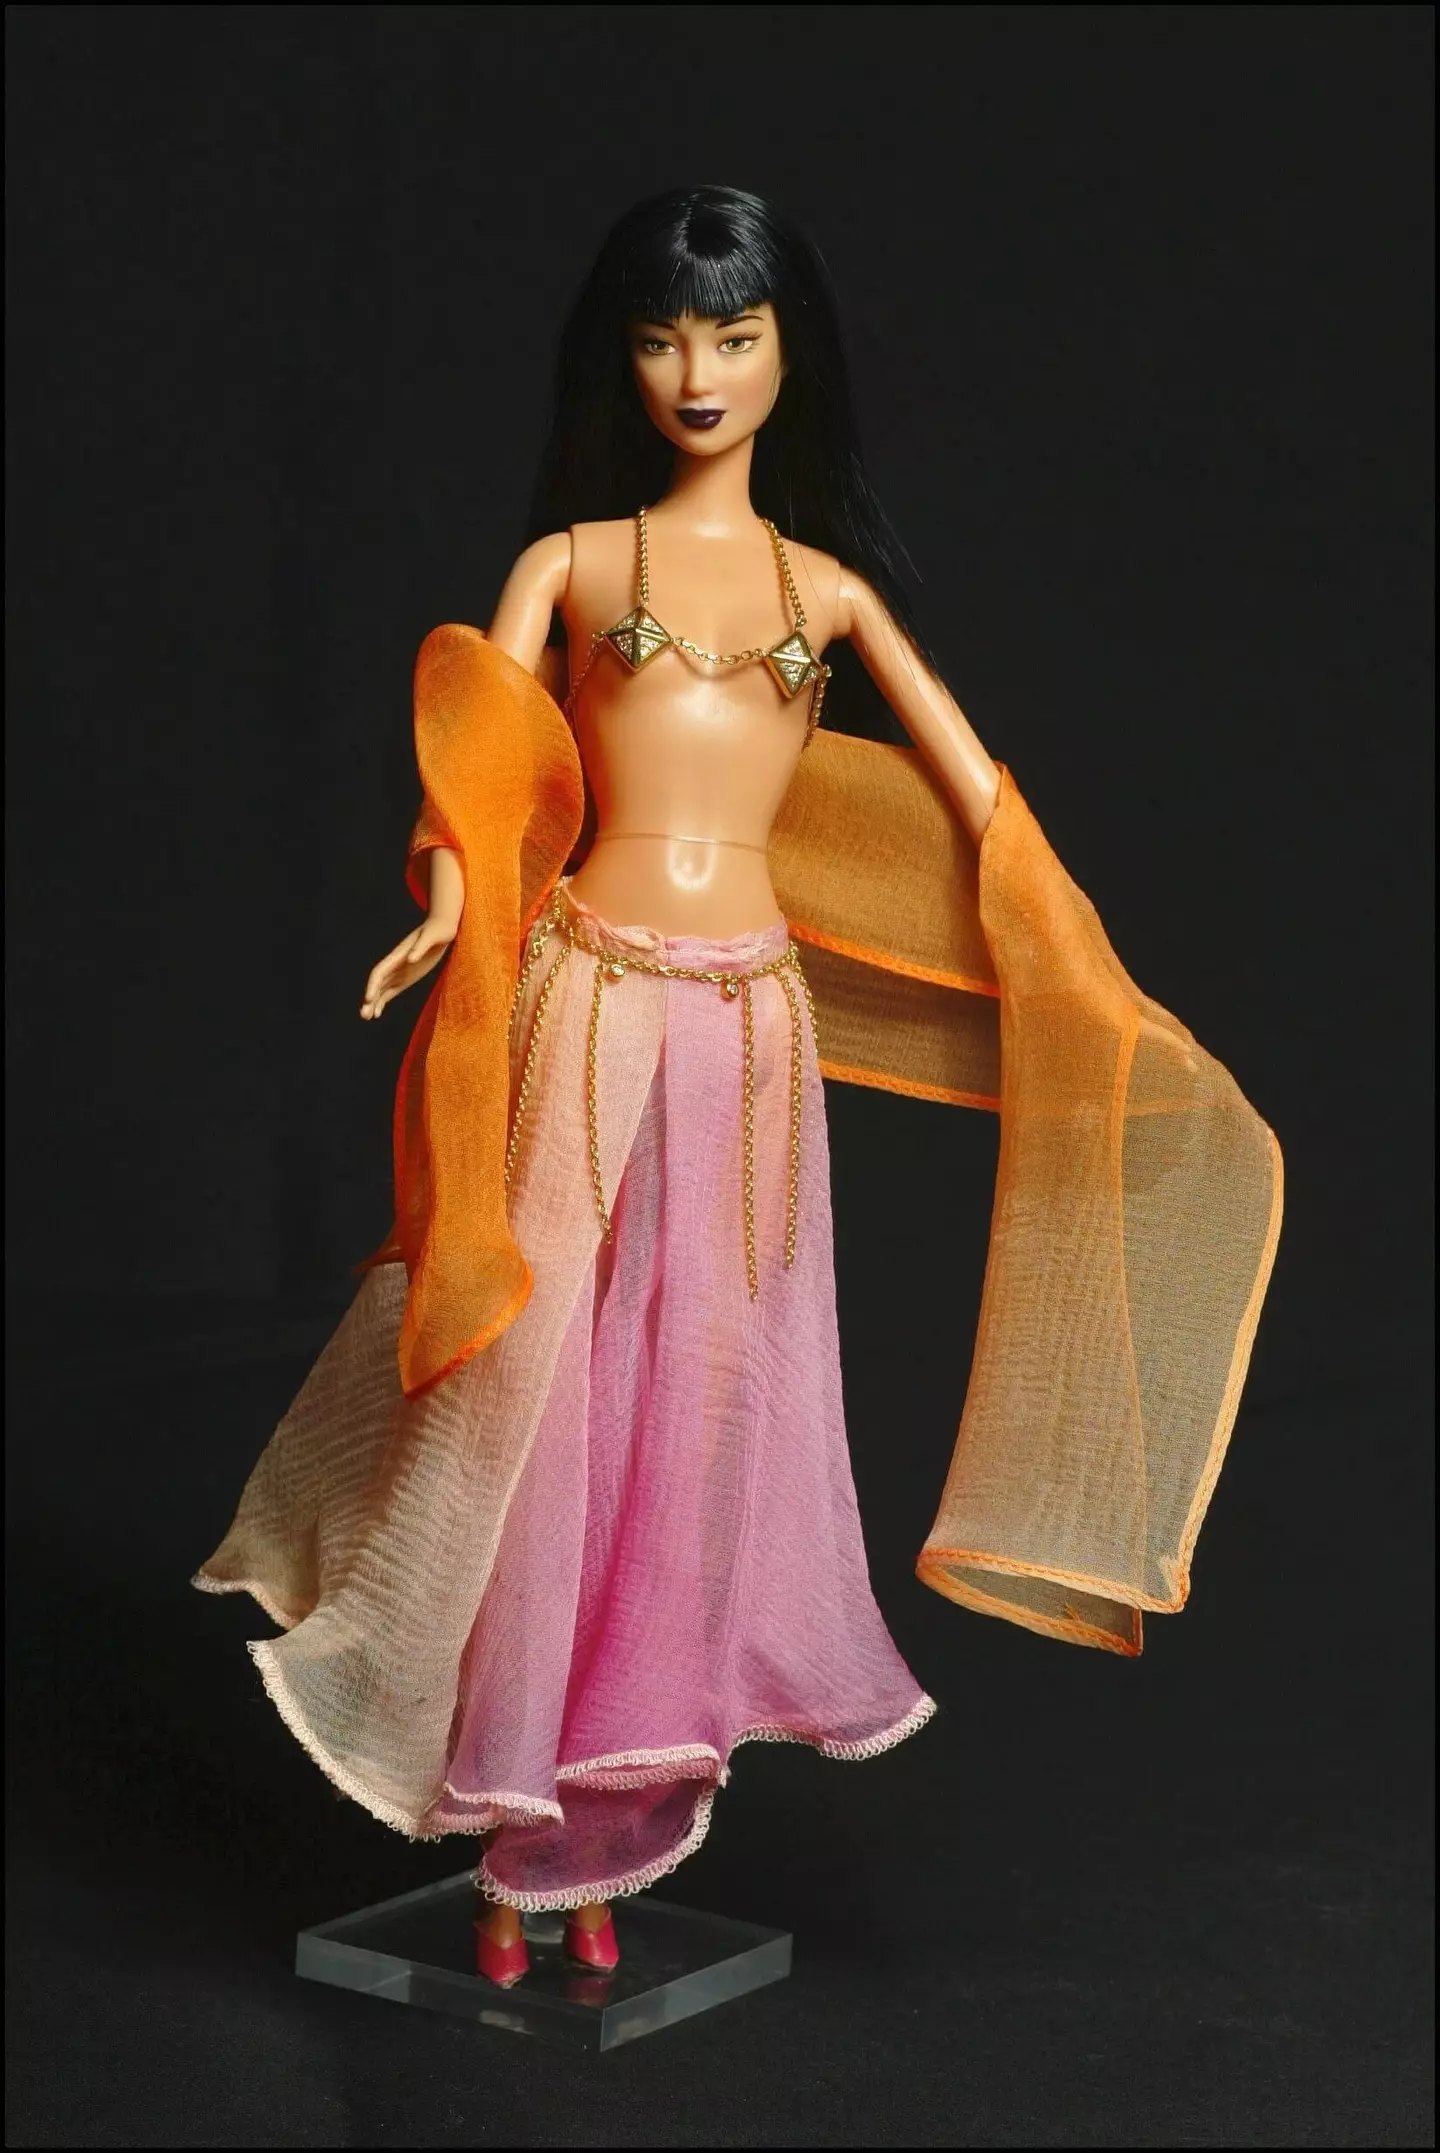 This Barbie was designed by De Beers and Vera Wang.